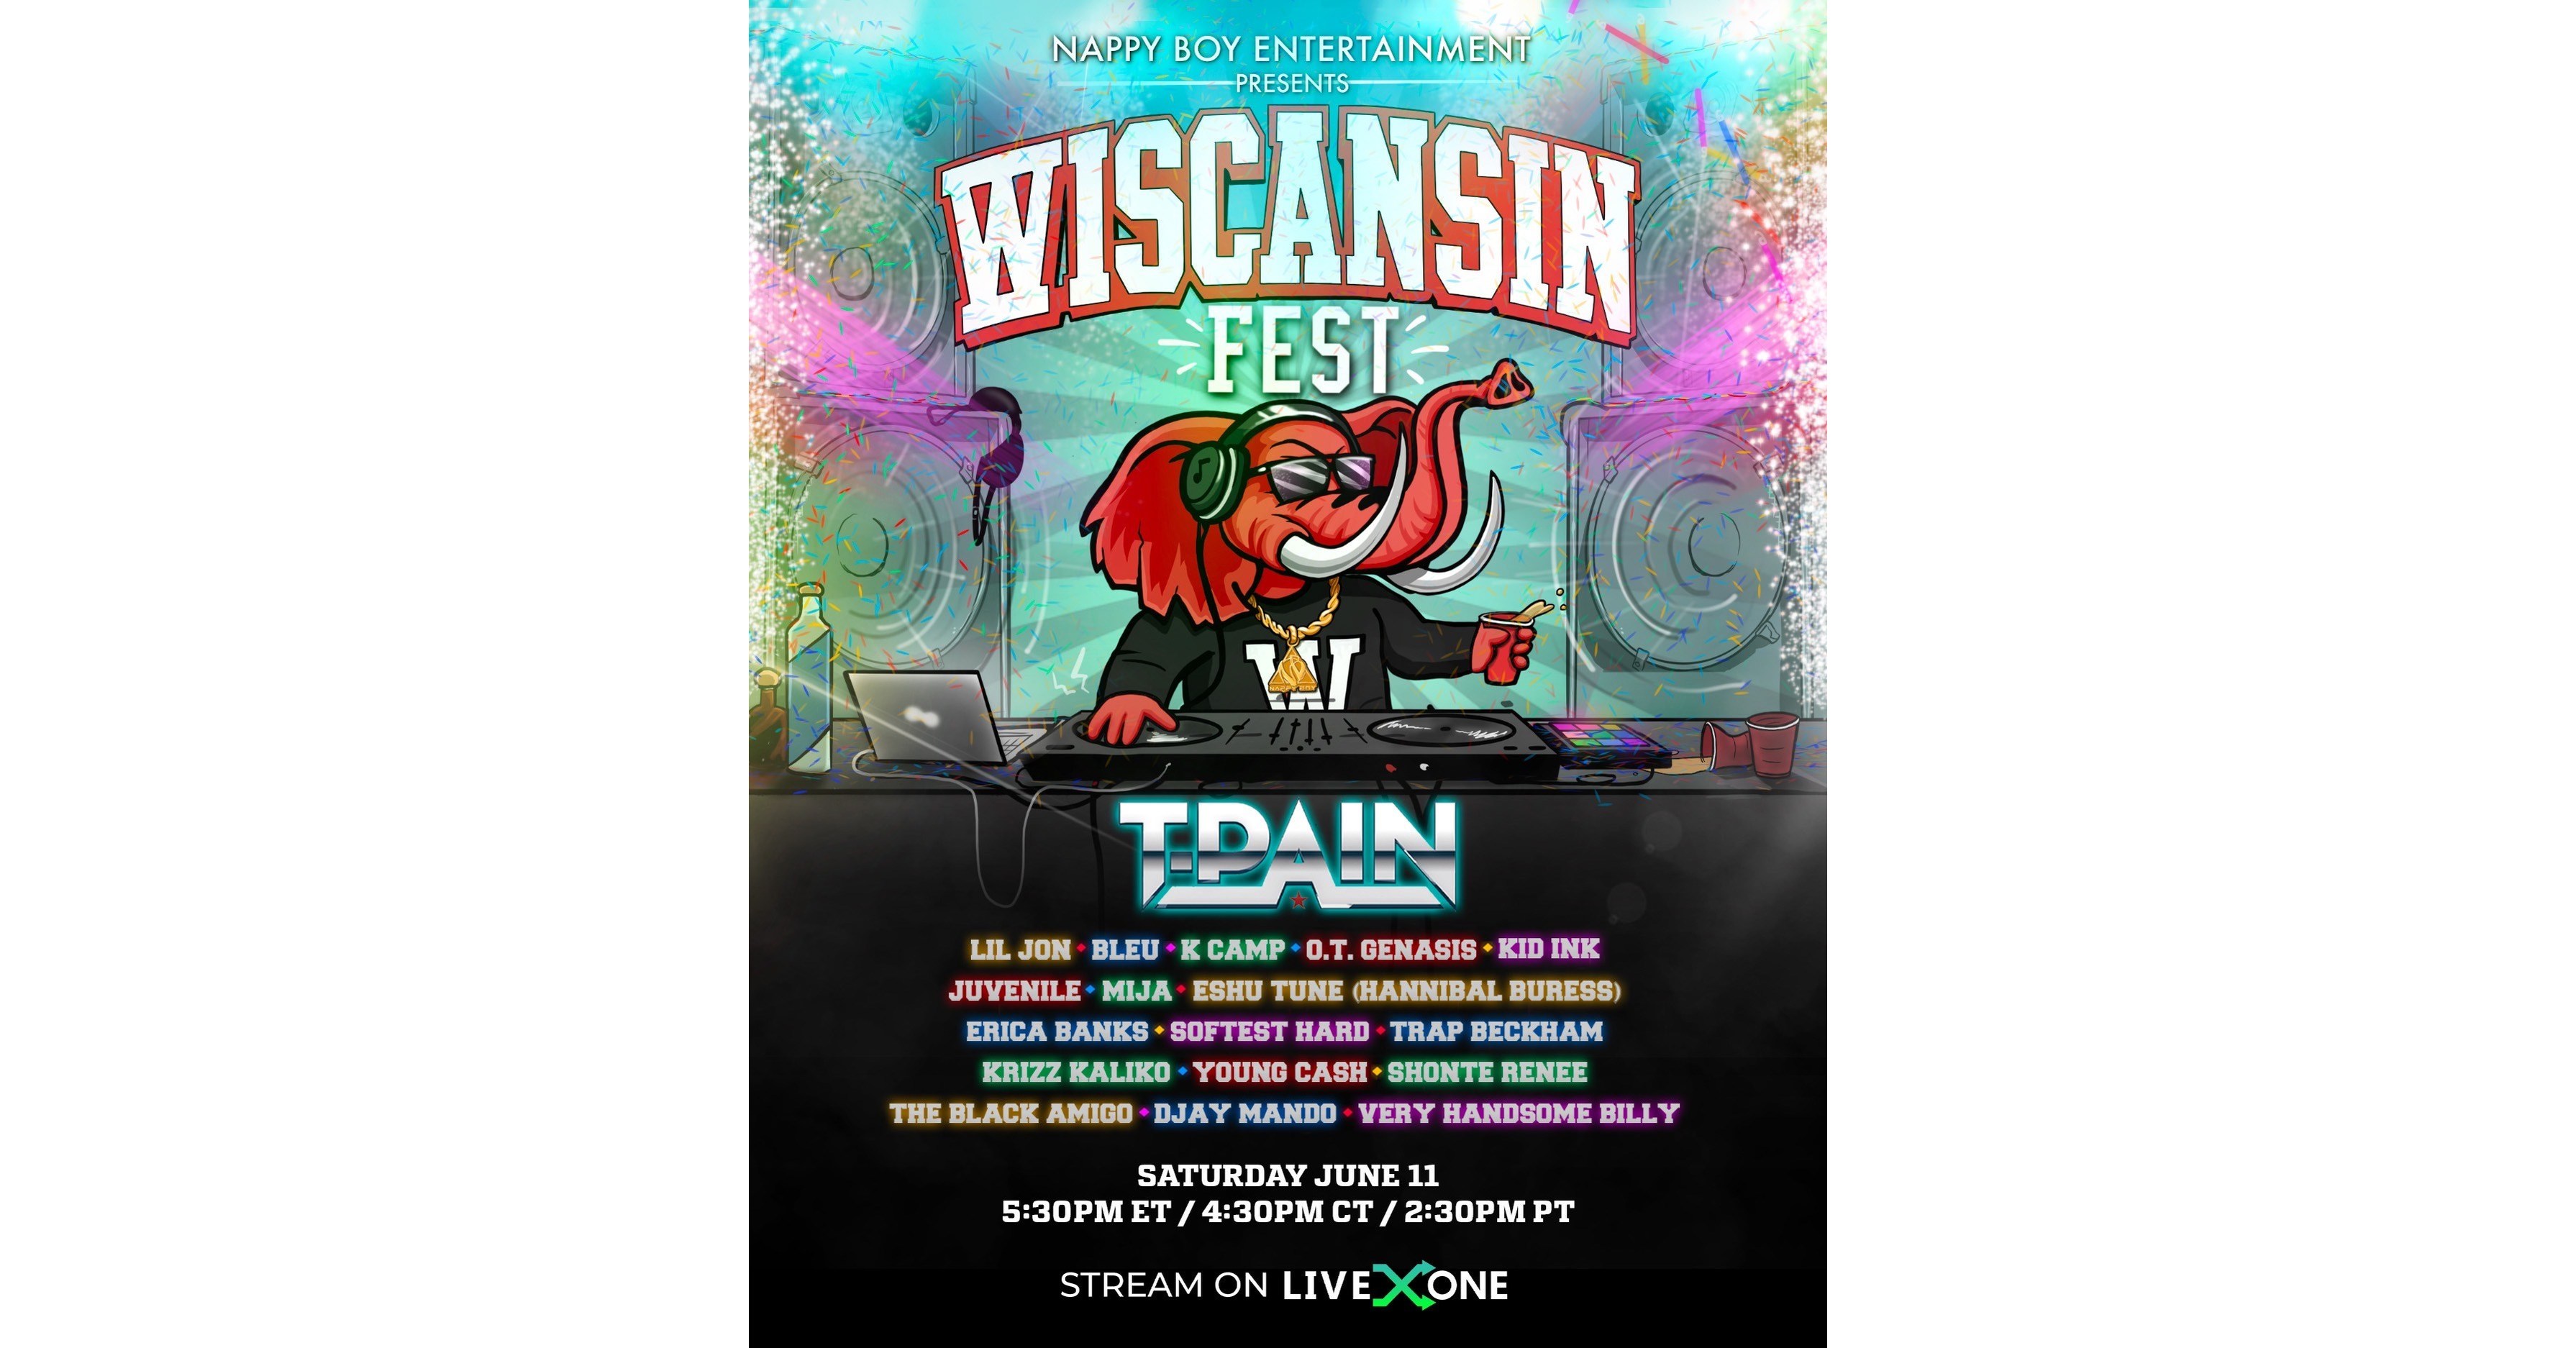 TPAIN'S FIRST ANNUAL "WISCANSIN FEST" TO BE GLOBALLY LIVESTREAMED ON